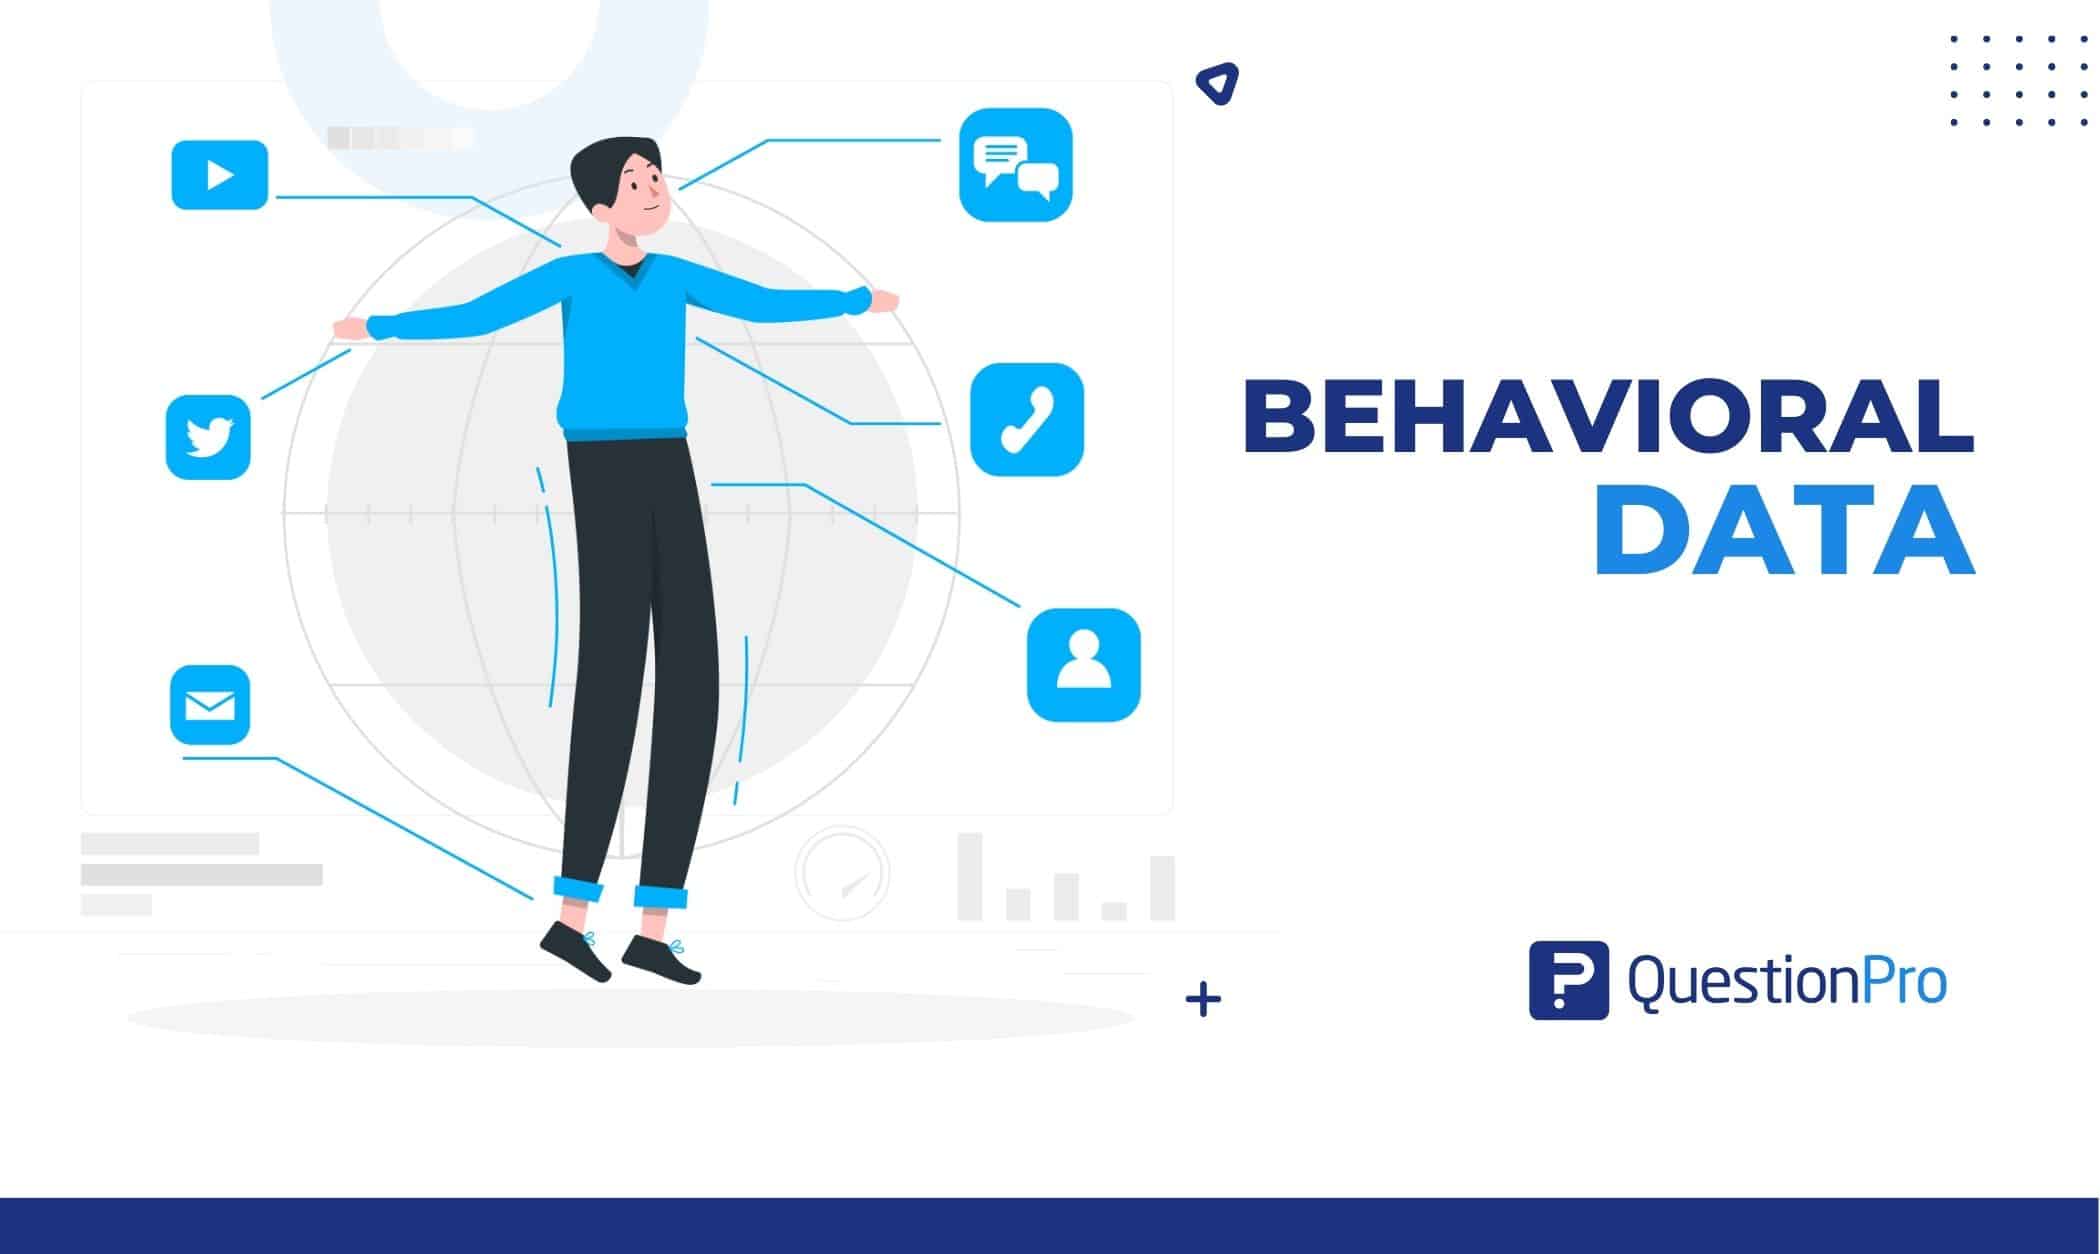 Behavioral data is collected when a customer interacts with a business. We will describe behavioral data, its importance, types & examples.